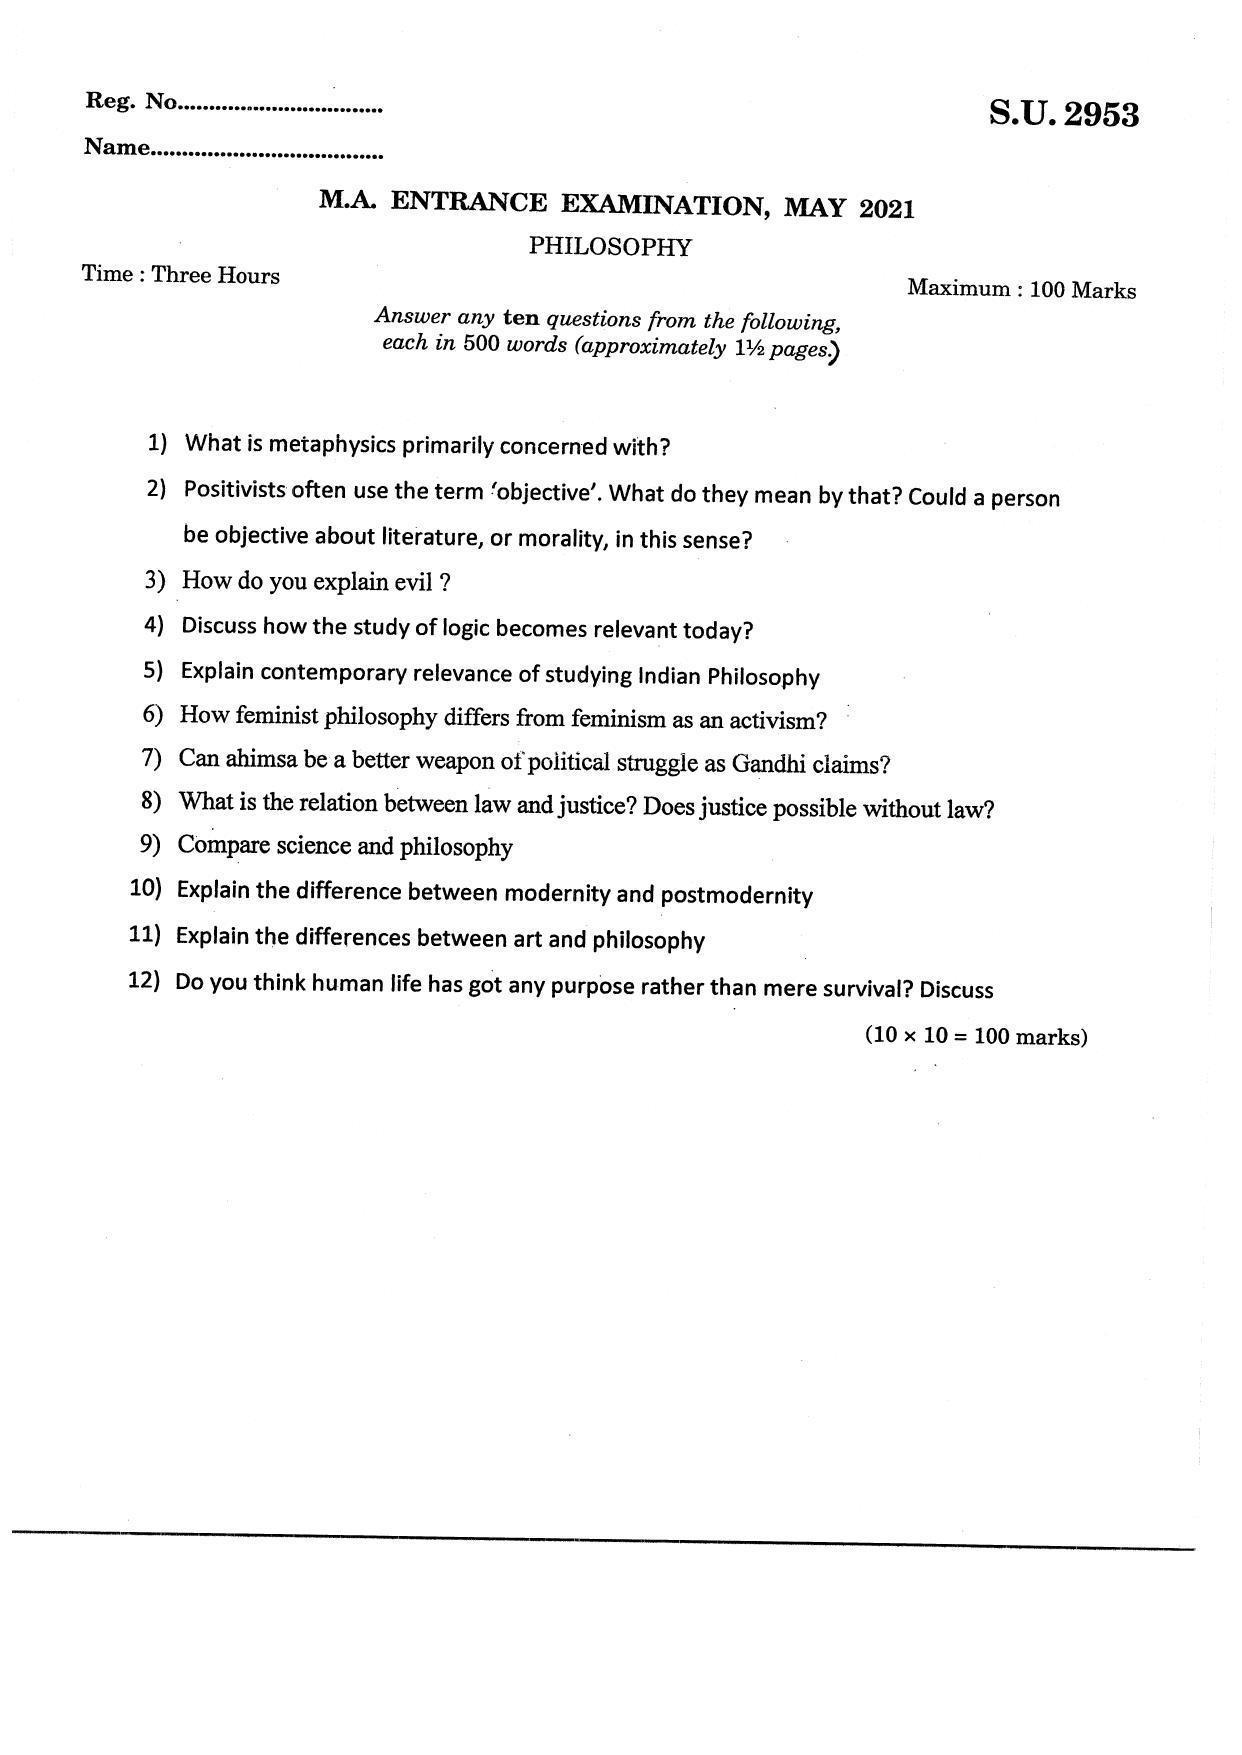 SSUS Entrance Exam Philosophy 2021 Question Paper - Page 1